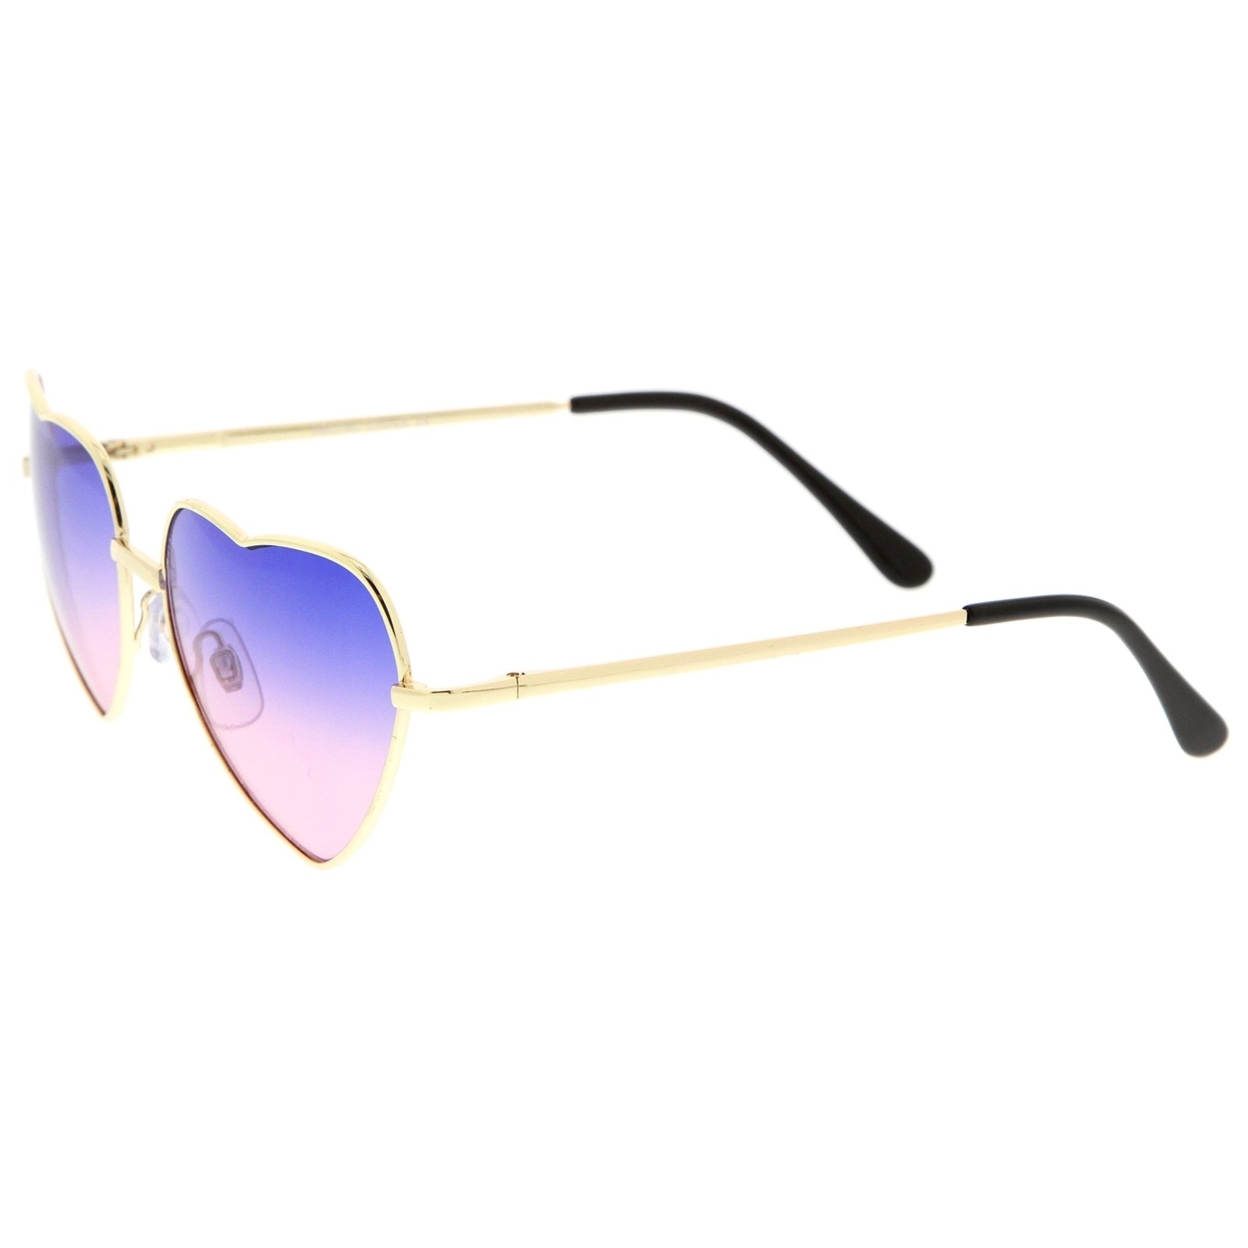 Small Thin Metal Frame Temples Vibrant Colored Gradient Lens Heart Sunglasses 52mm - Gold / Blue-Yellow